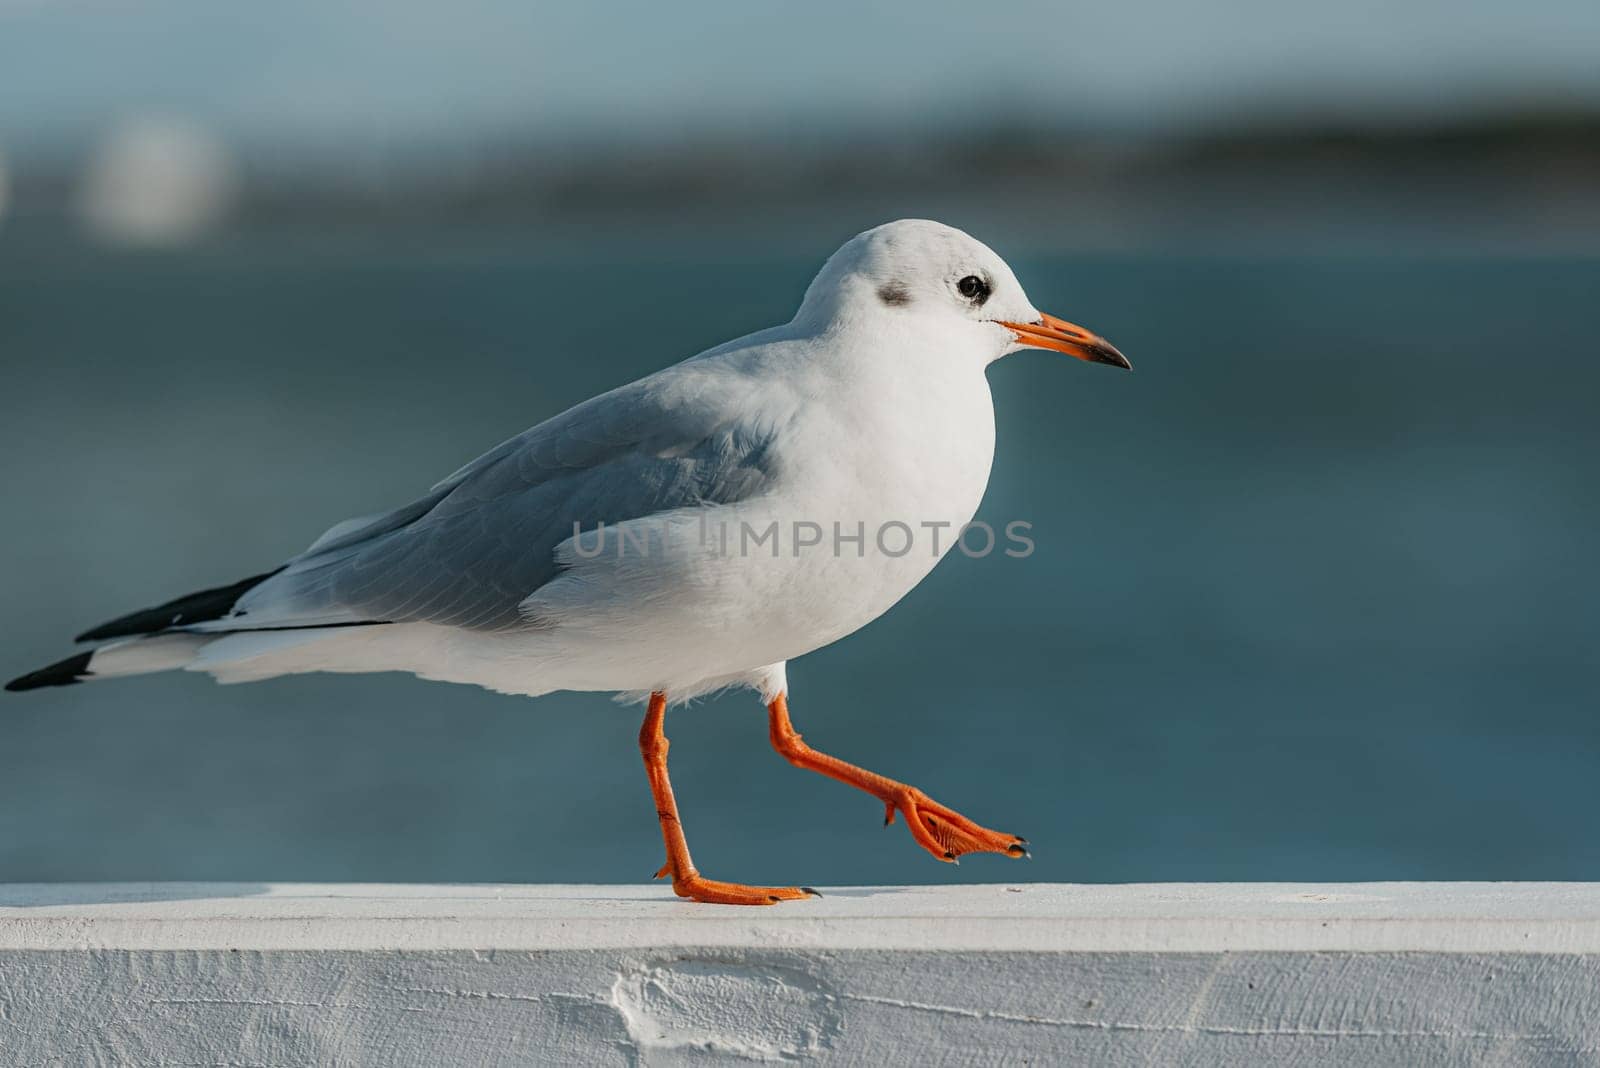 The black-headed adult gull in winter plumage strolls on a pier fence on the autumn Baltic Sea.